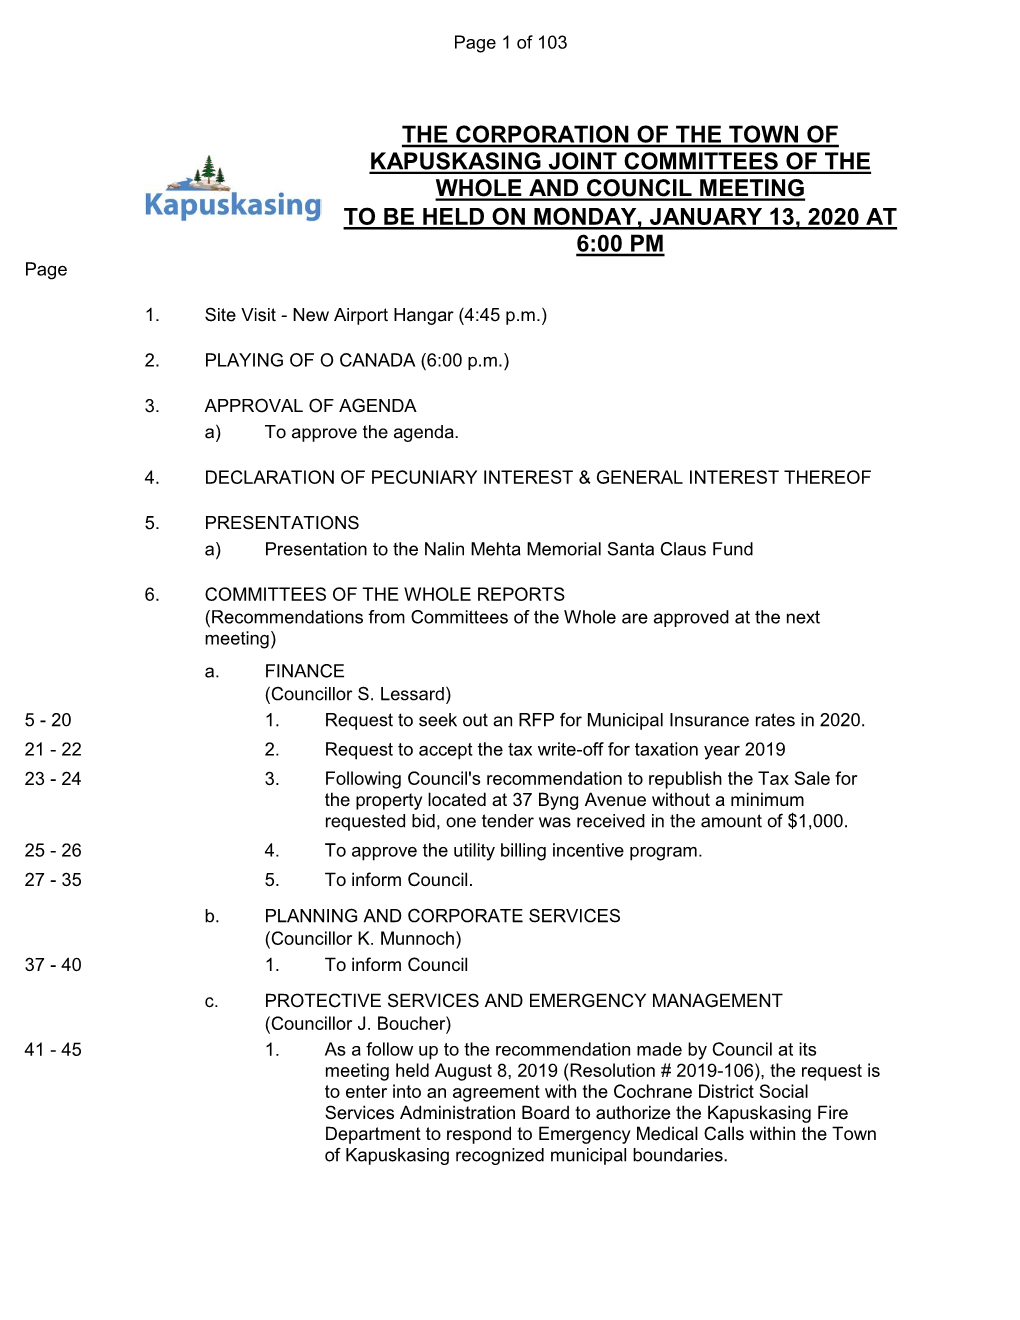 JOINT COMMITTEES of the WHOLE and COUNCIL MEETING to BE HELD on MONDAY, JANUARY 13, 2020 at 6:00 PM Page